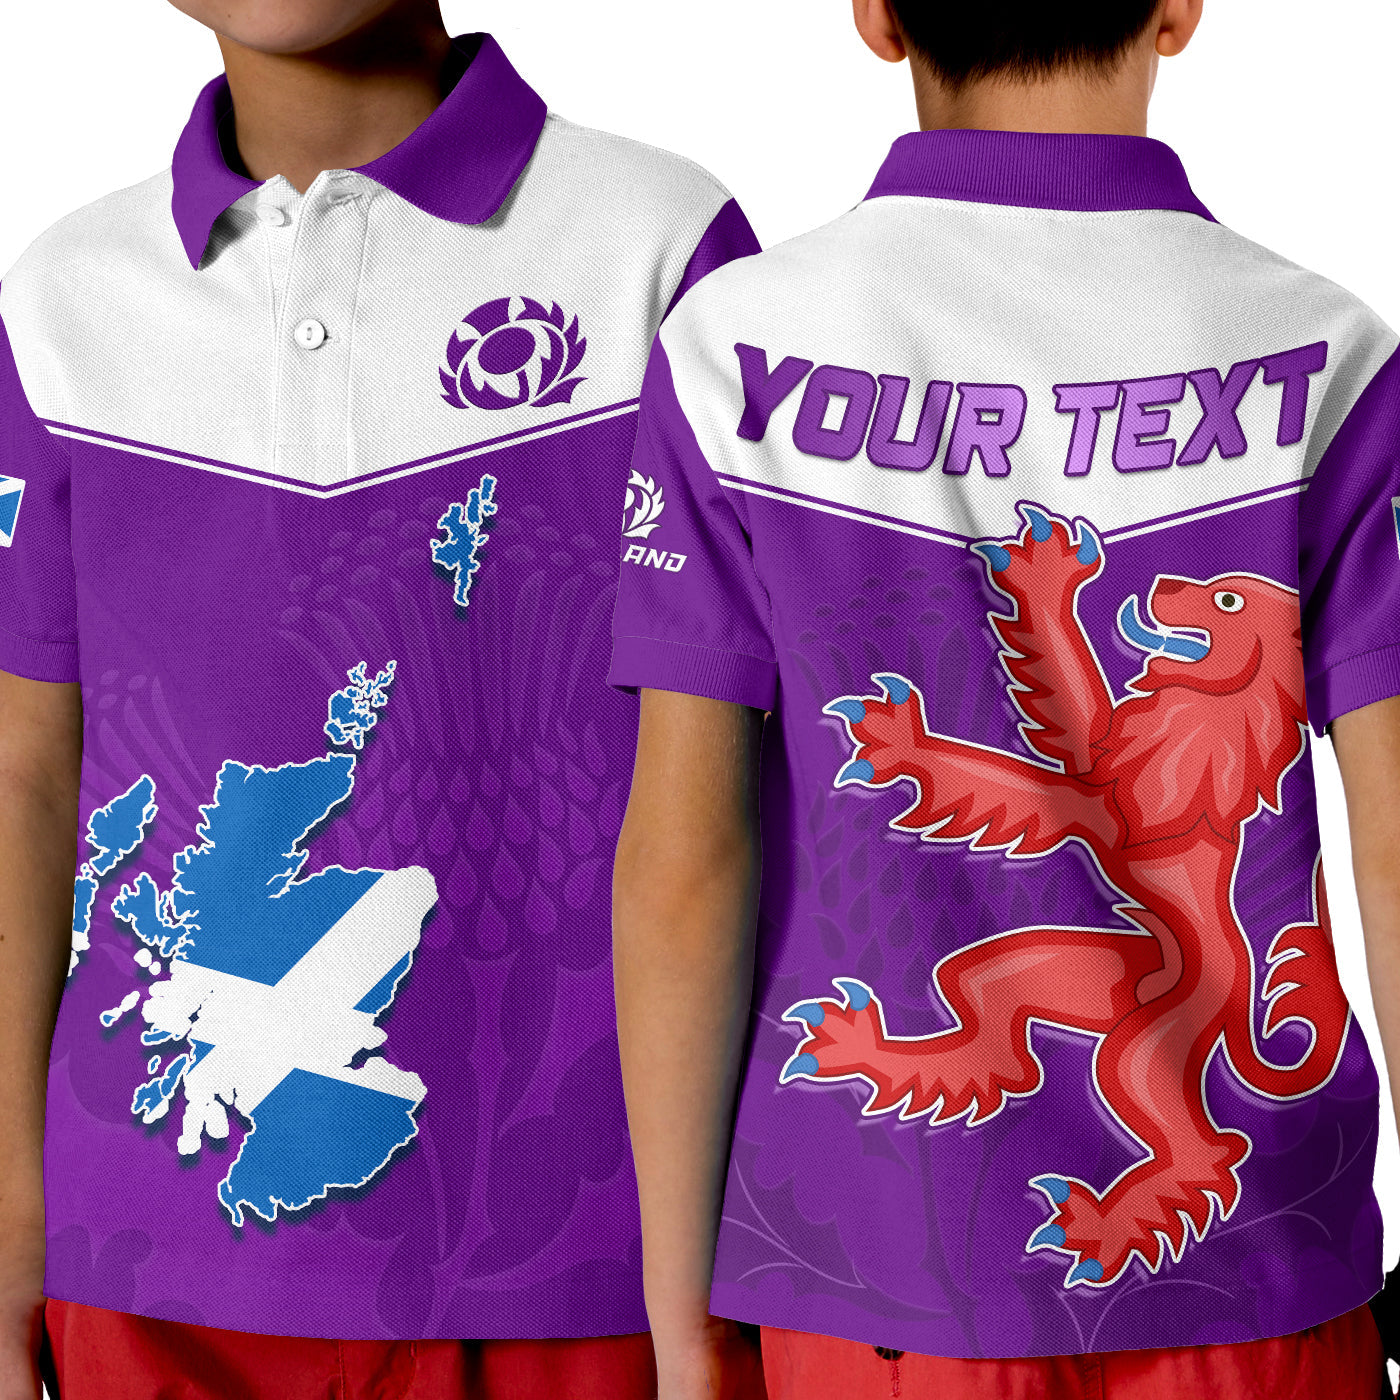 custom-personalised-scottish-rugby-polo-shirt-map-of-scotland-thistle-purple-version-lt14